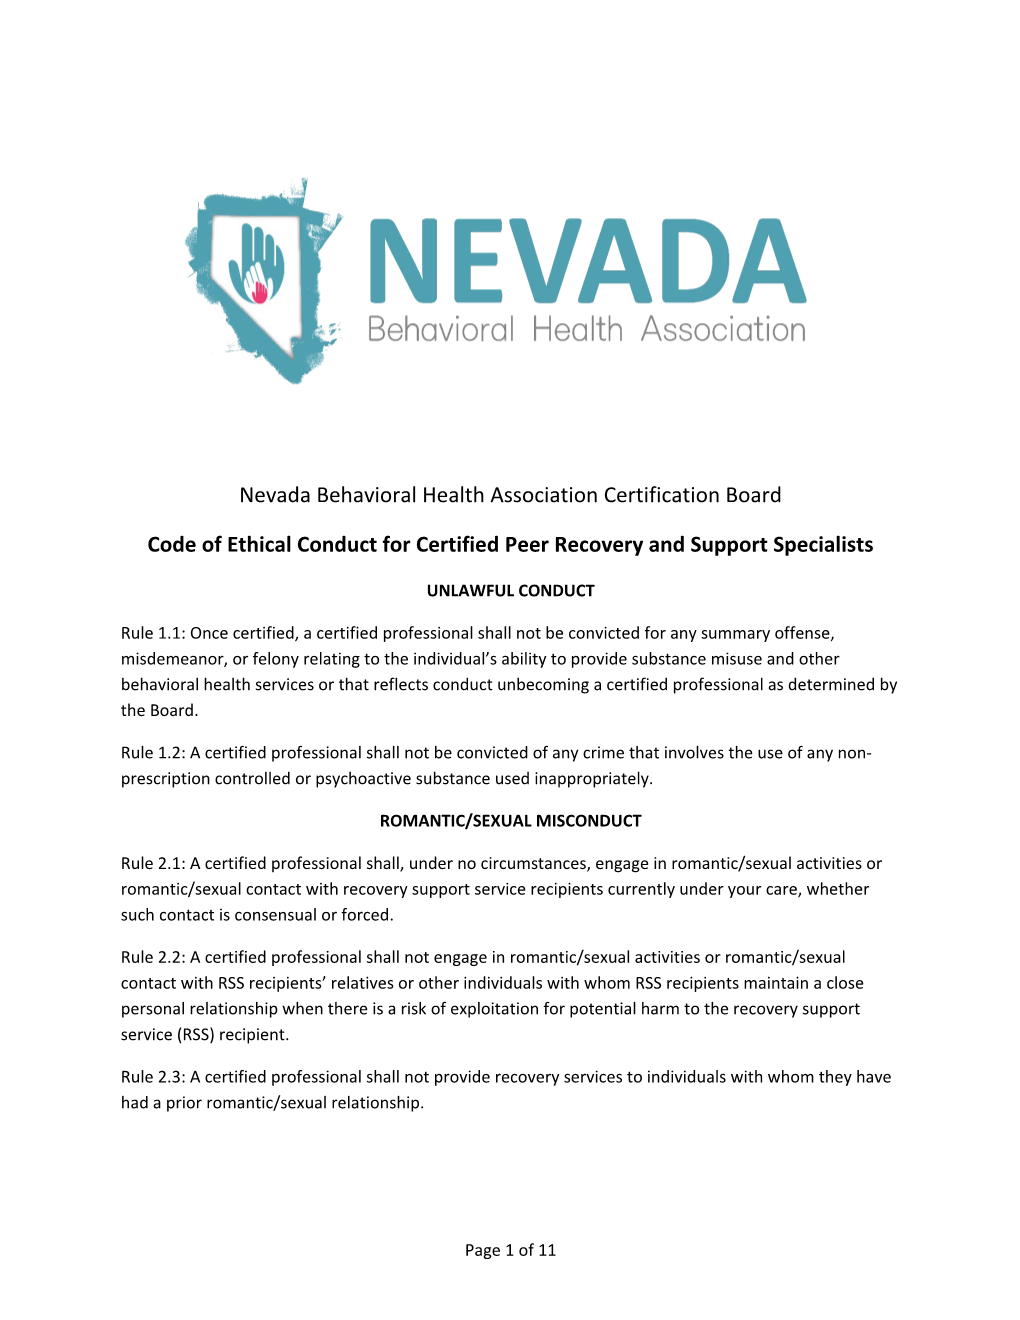 Code of Ethical Conduct for Certified Peer Recovery and Support Specialists